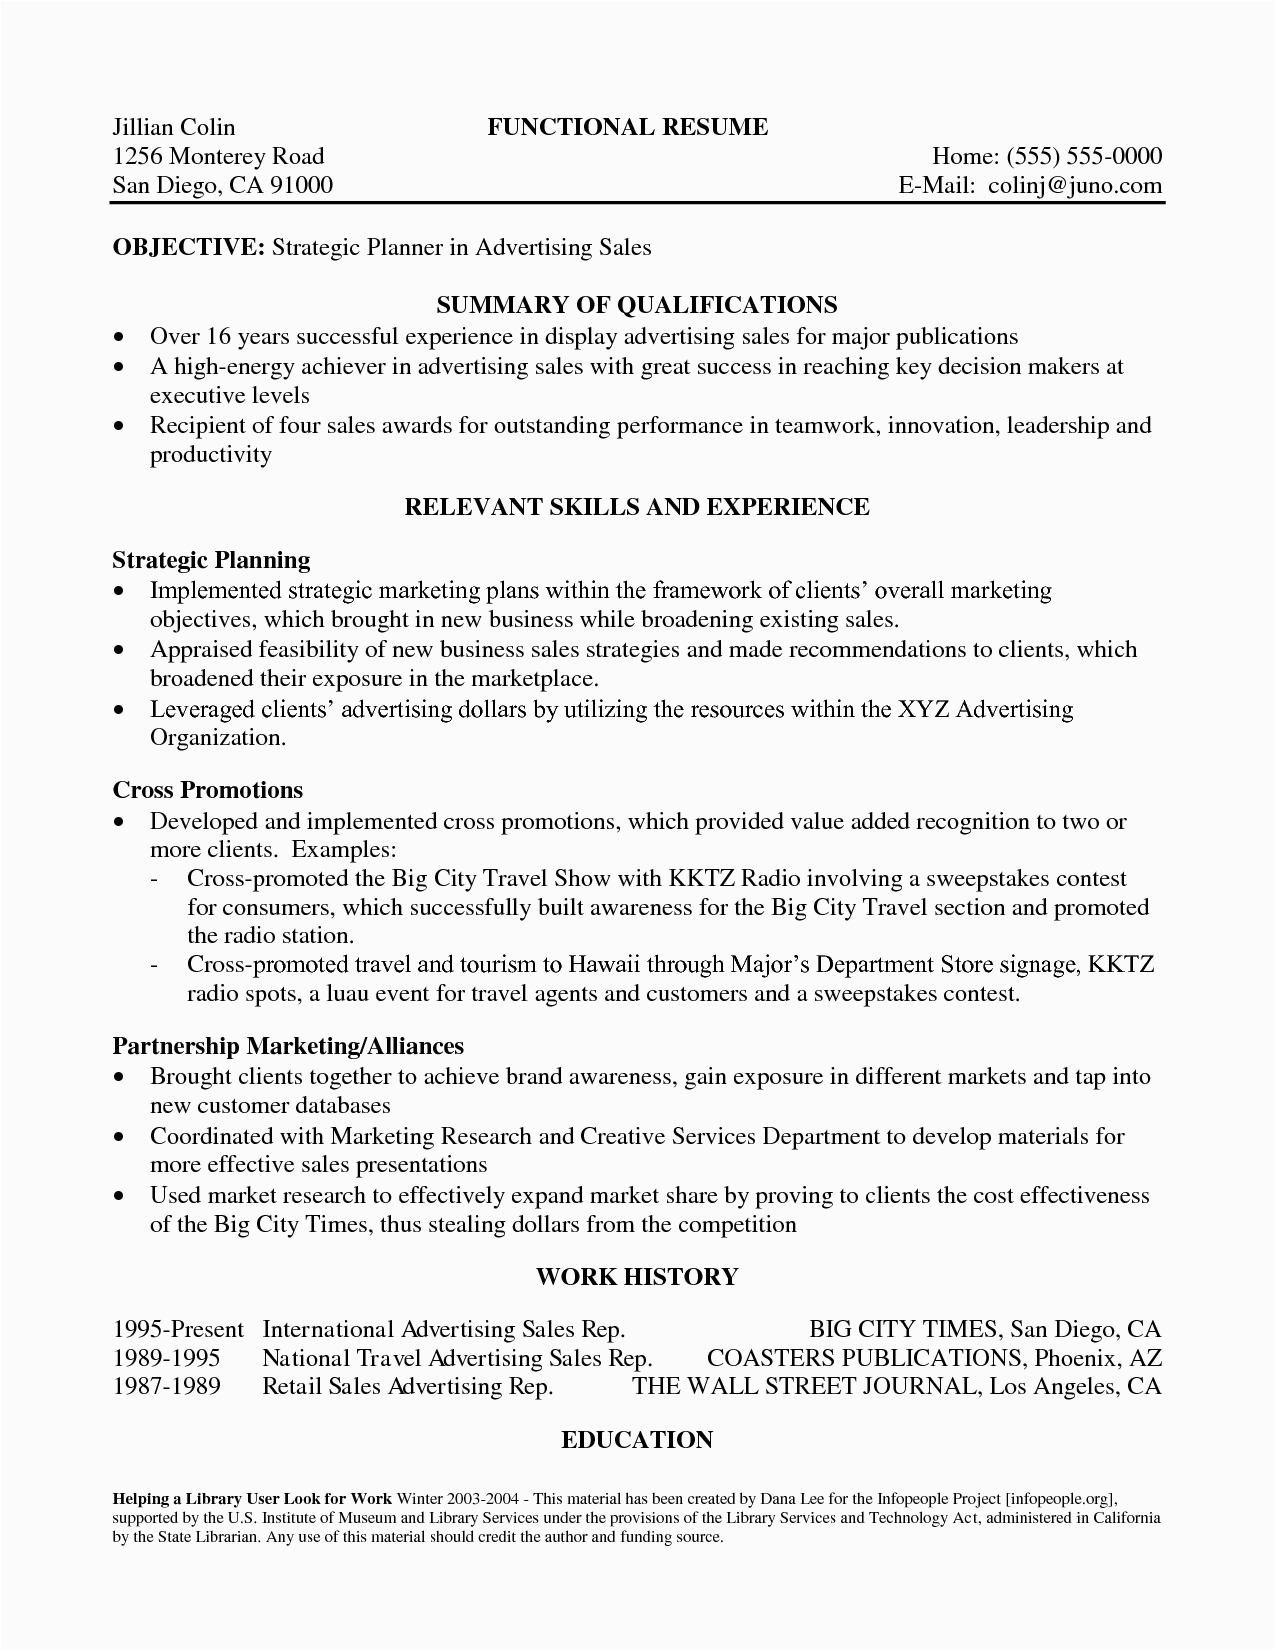 Sample Resume with Summary Of Qualifications format What is A Summary Of Qualifications